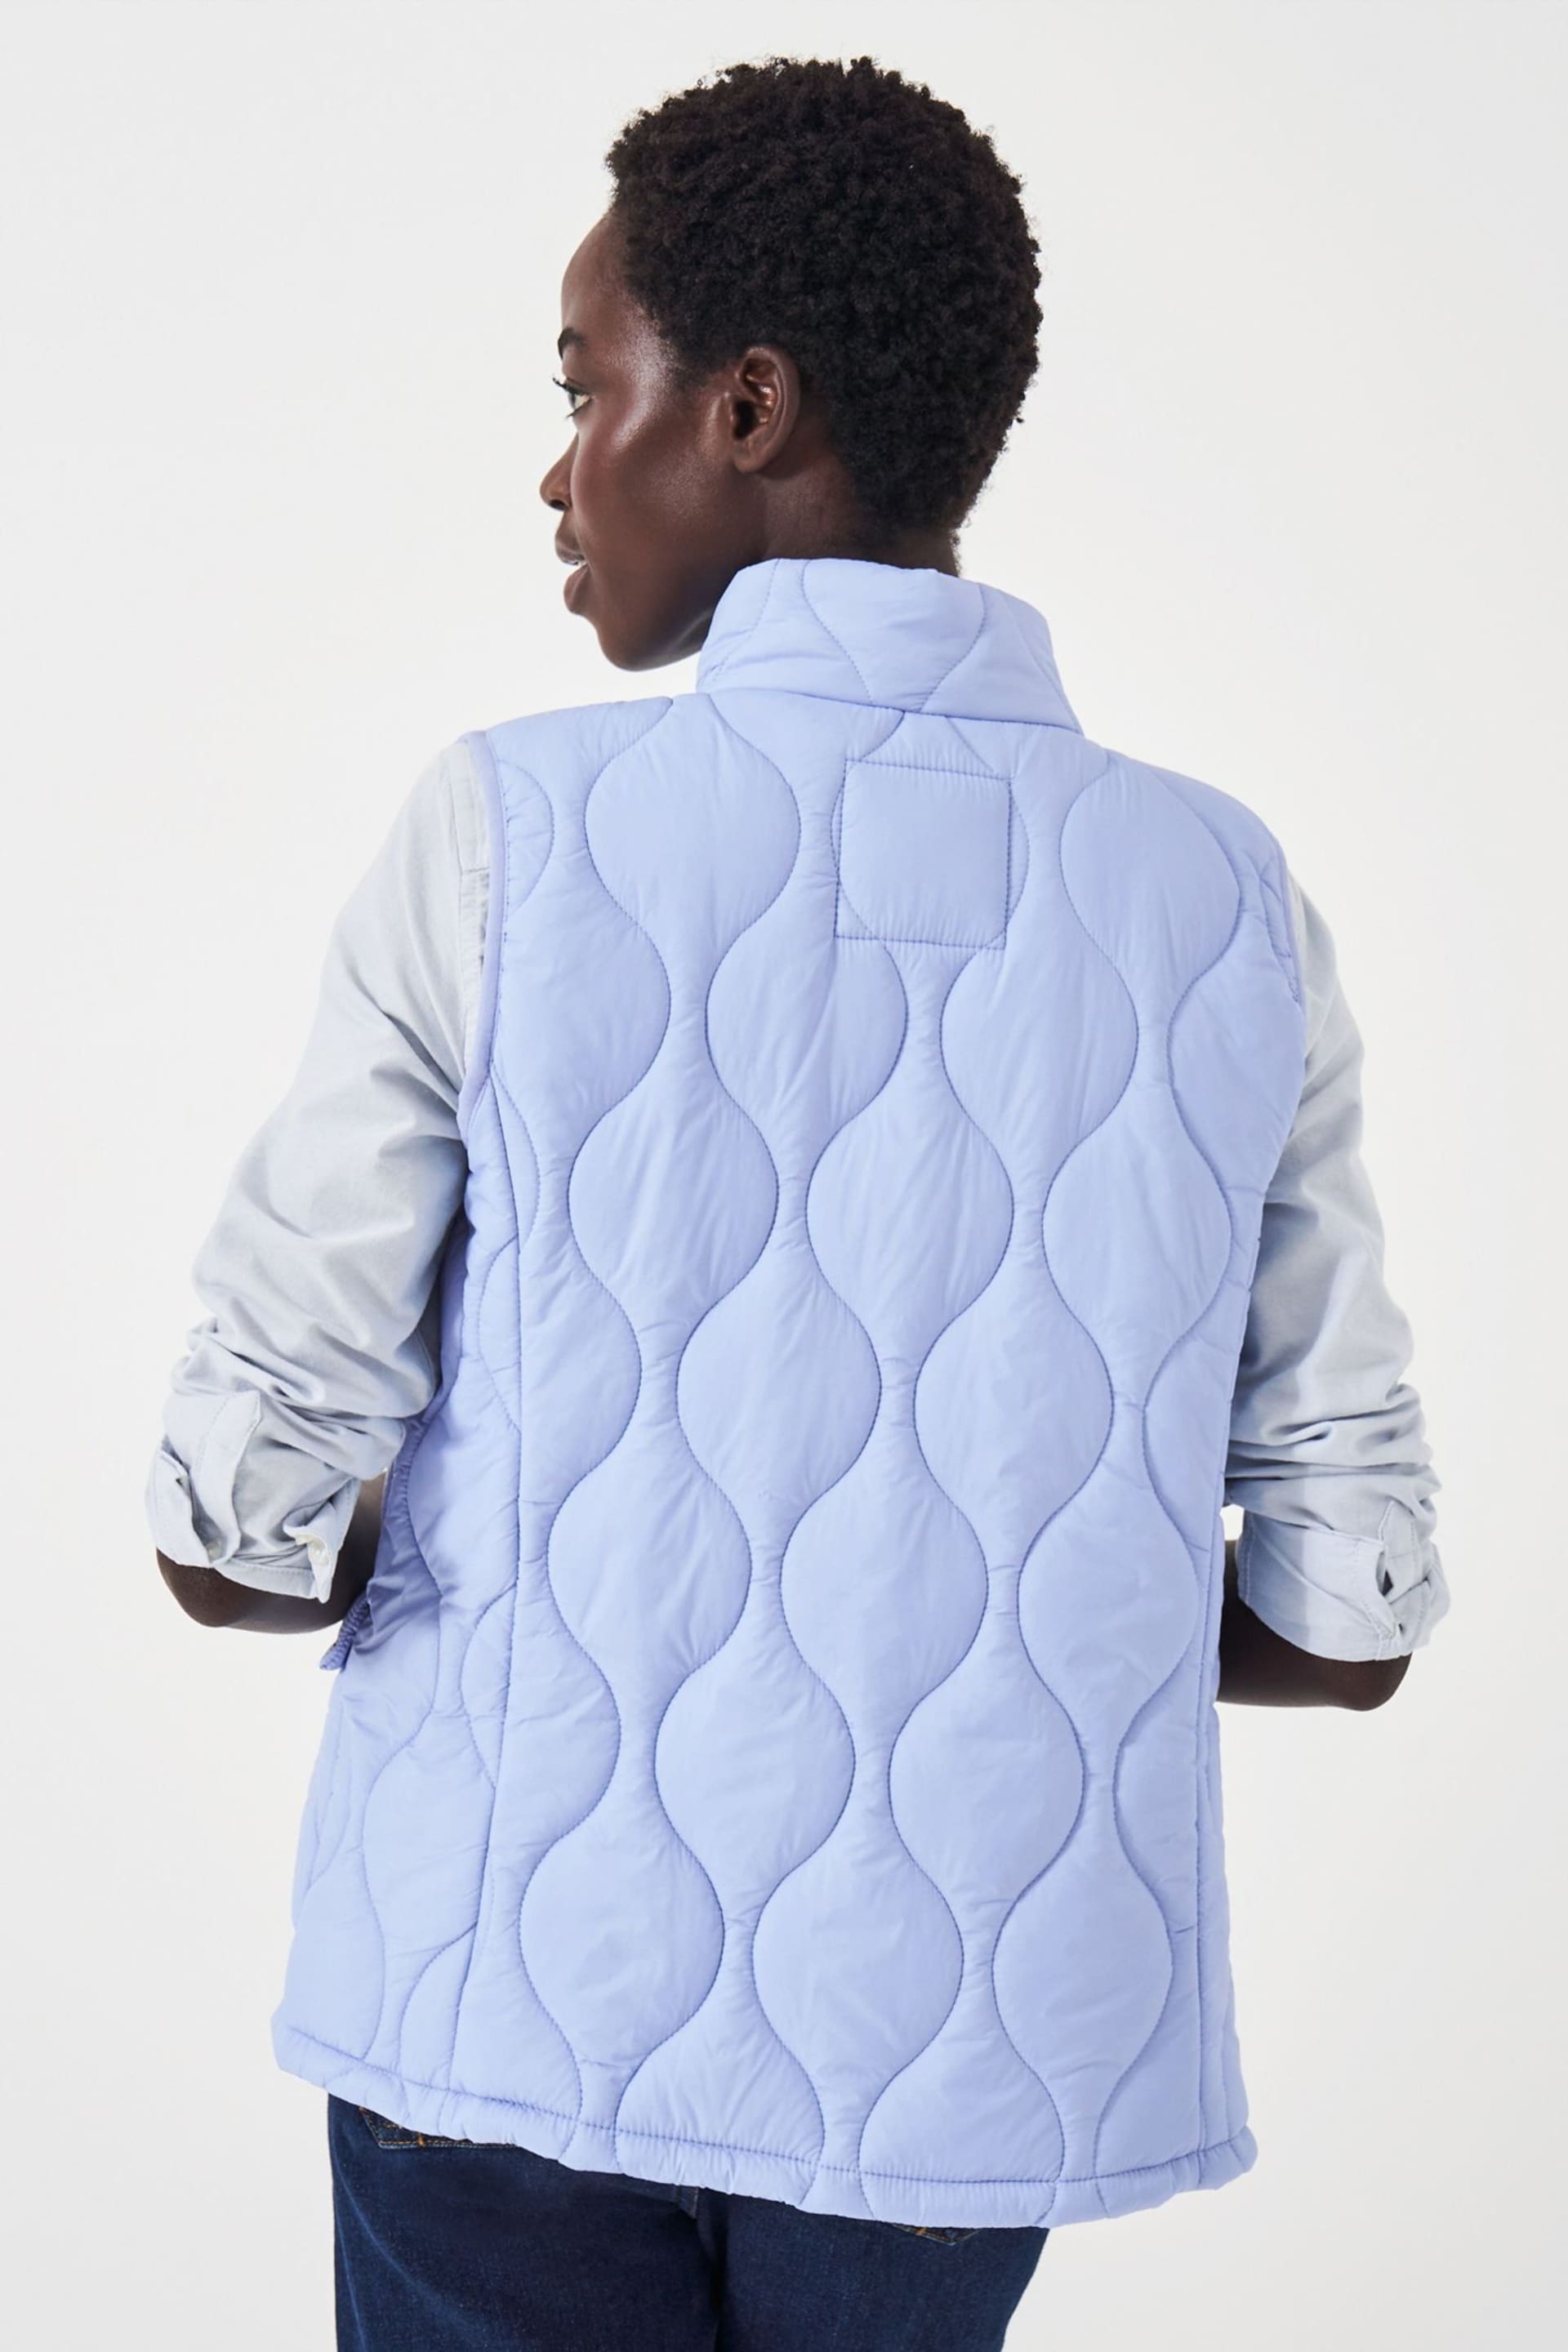 Crew Clothing Lightweight Quilting Gilet - Image 3 of 6